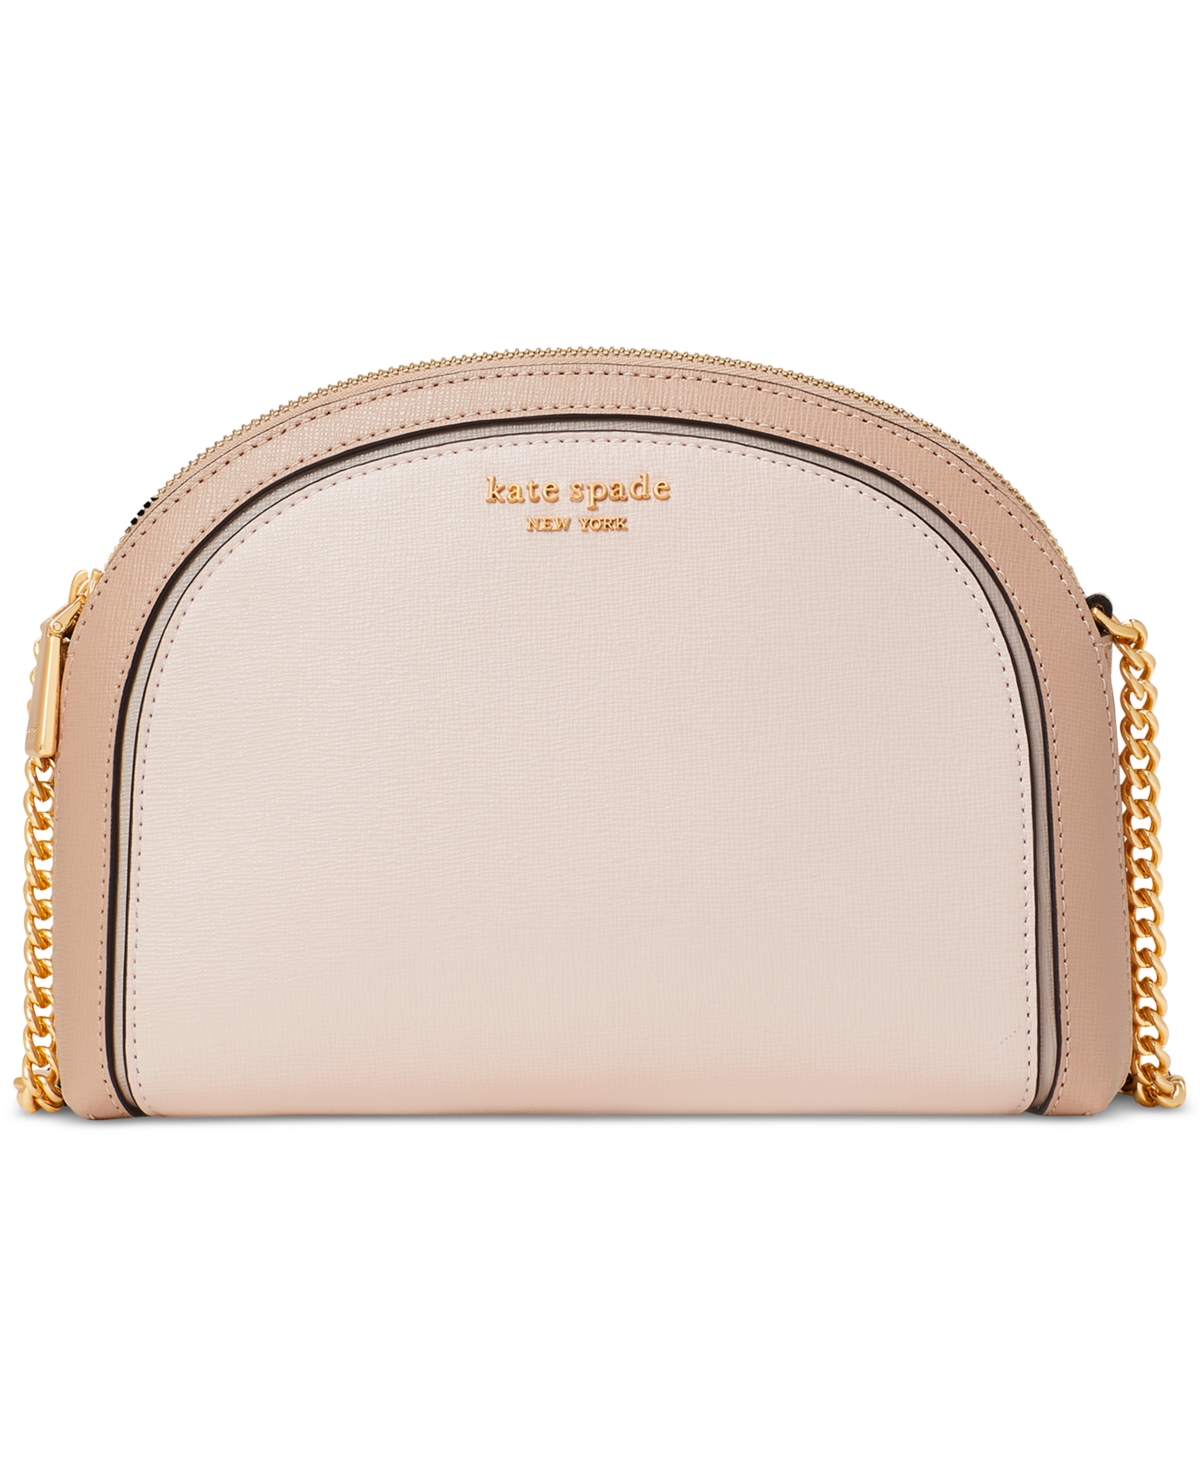 Kate Spade Morgan Colorblocked Saffiano Leather Double Zip Dome Crossbody In Pale Dogwood Multi